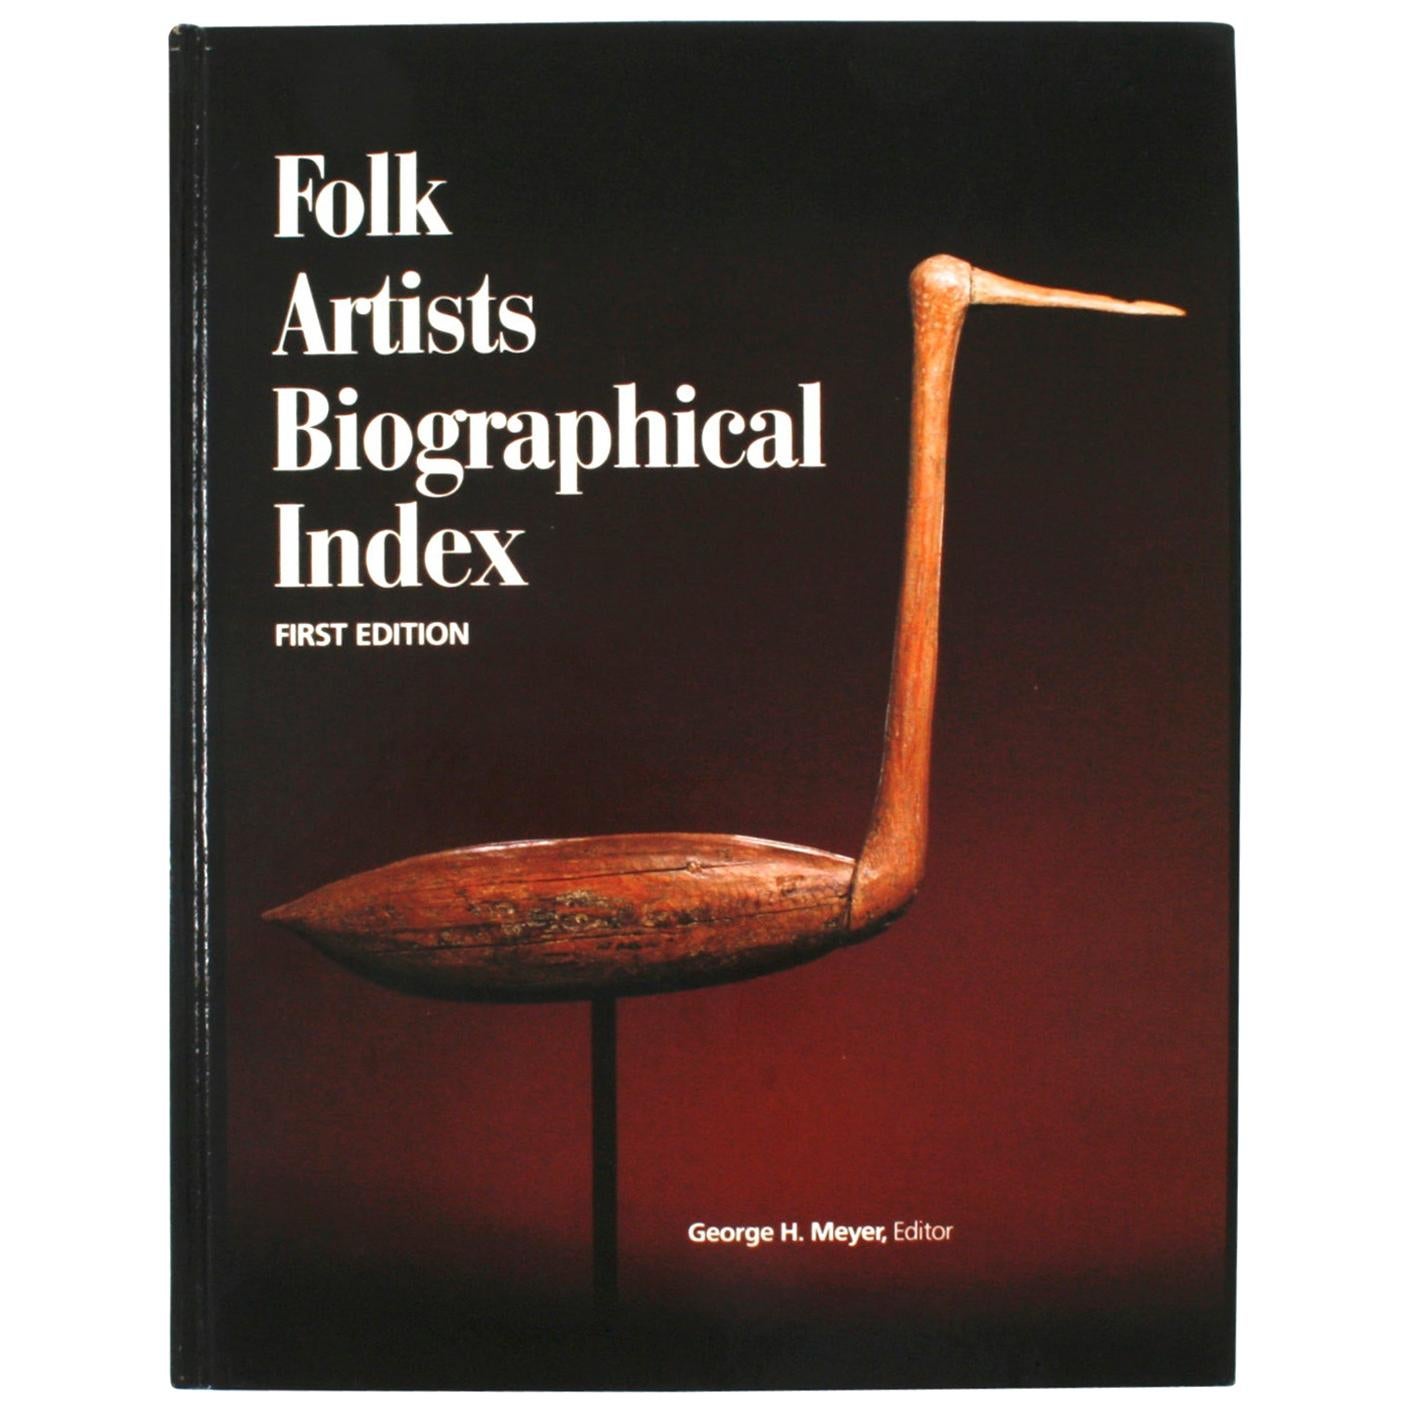 Folk Artists Biographical Index, First Edition